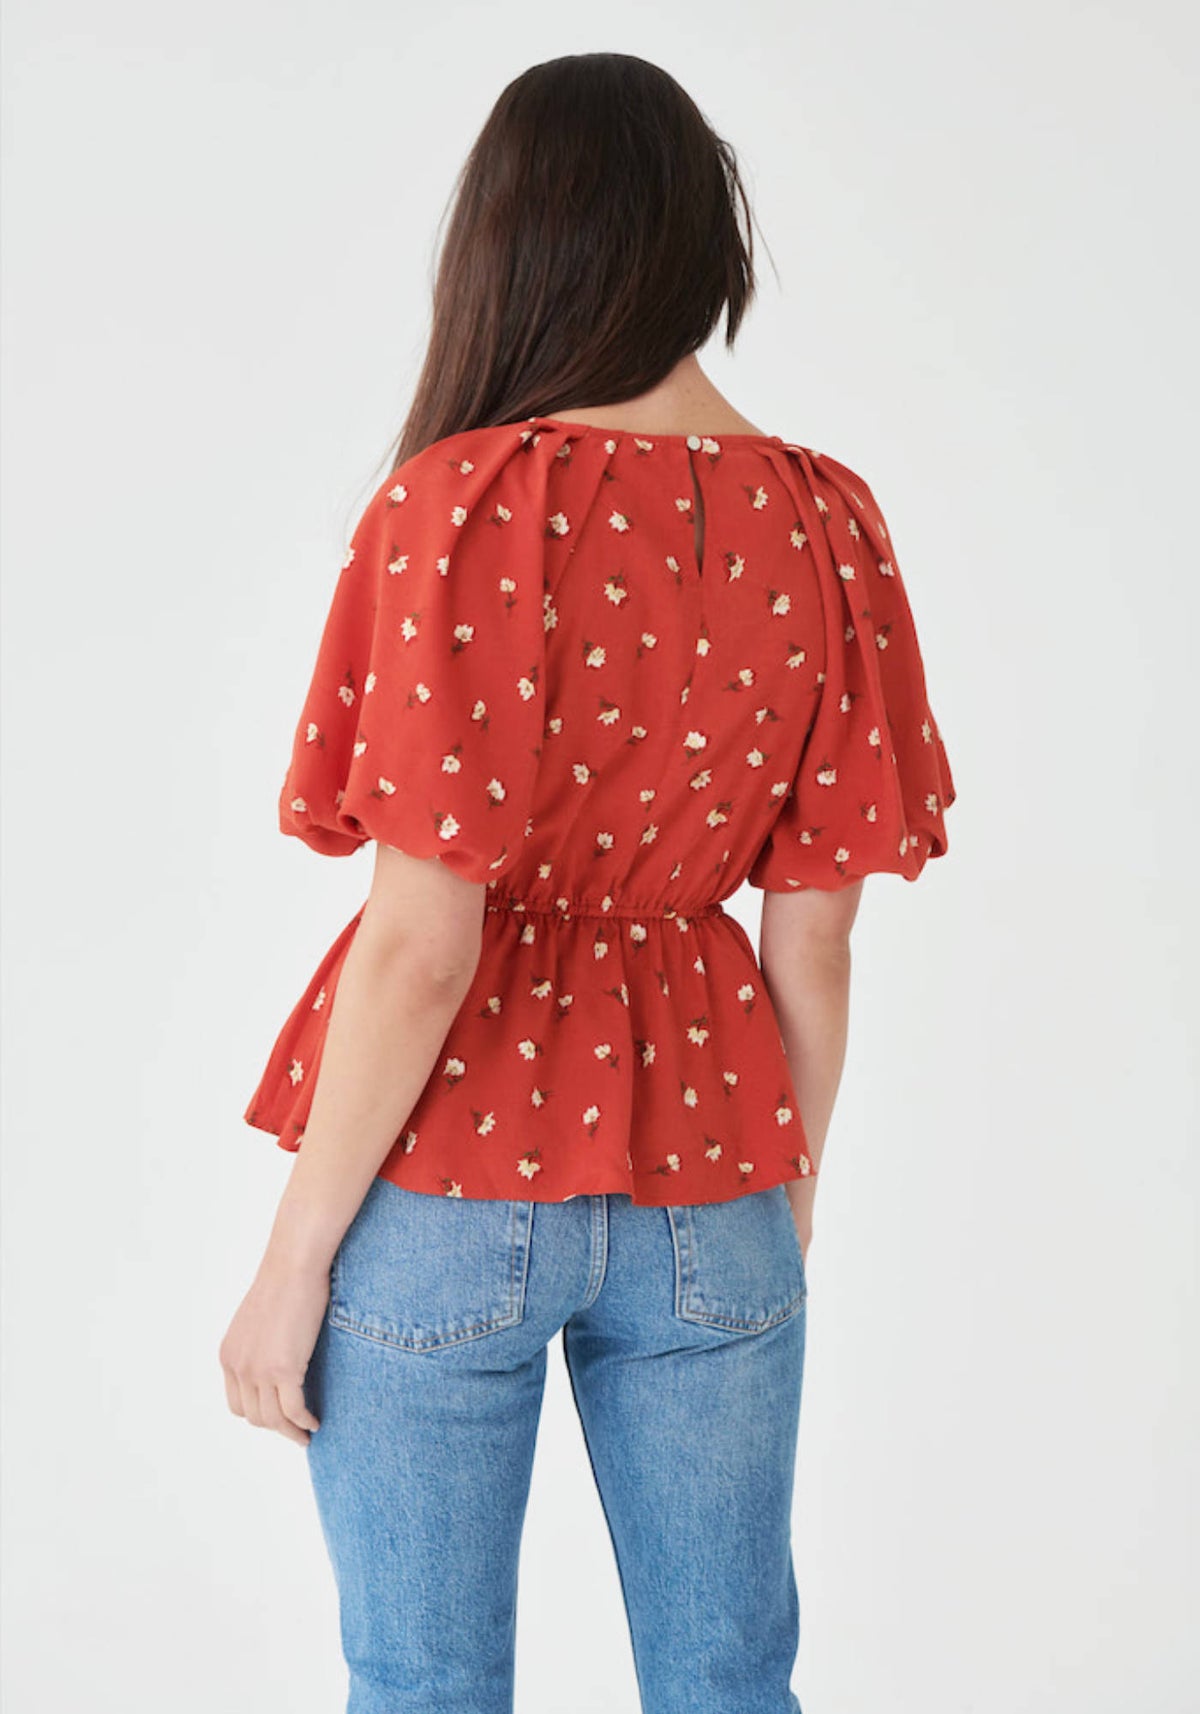 Puff Sleeve Smock Peplum Top in Red Floral